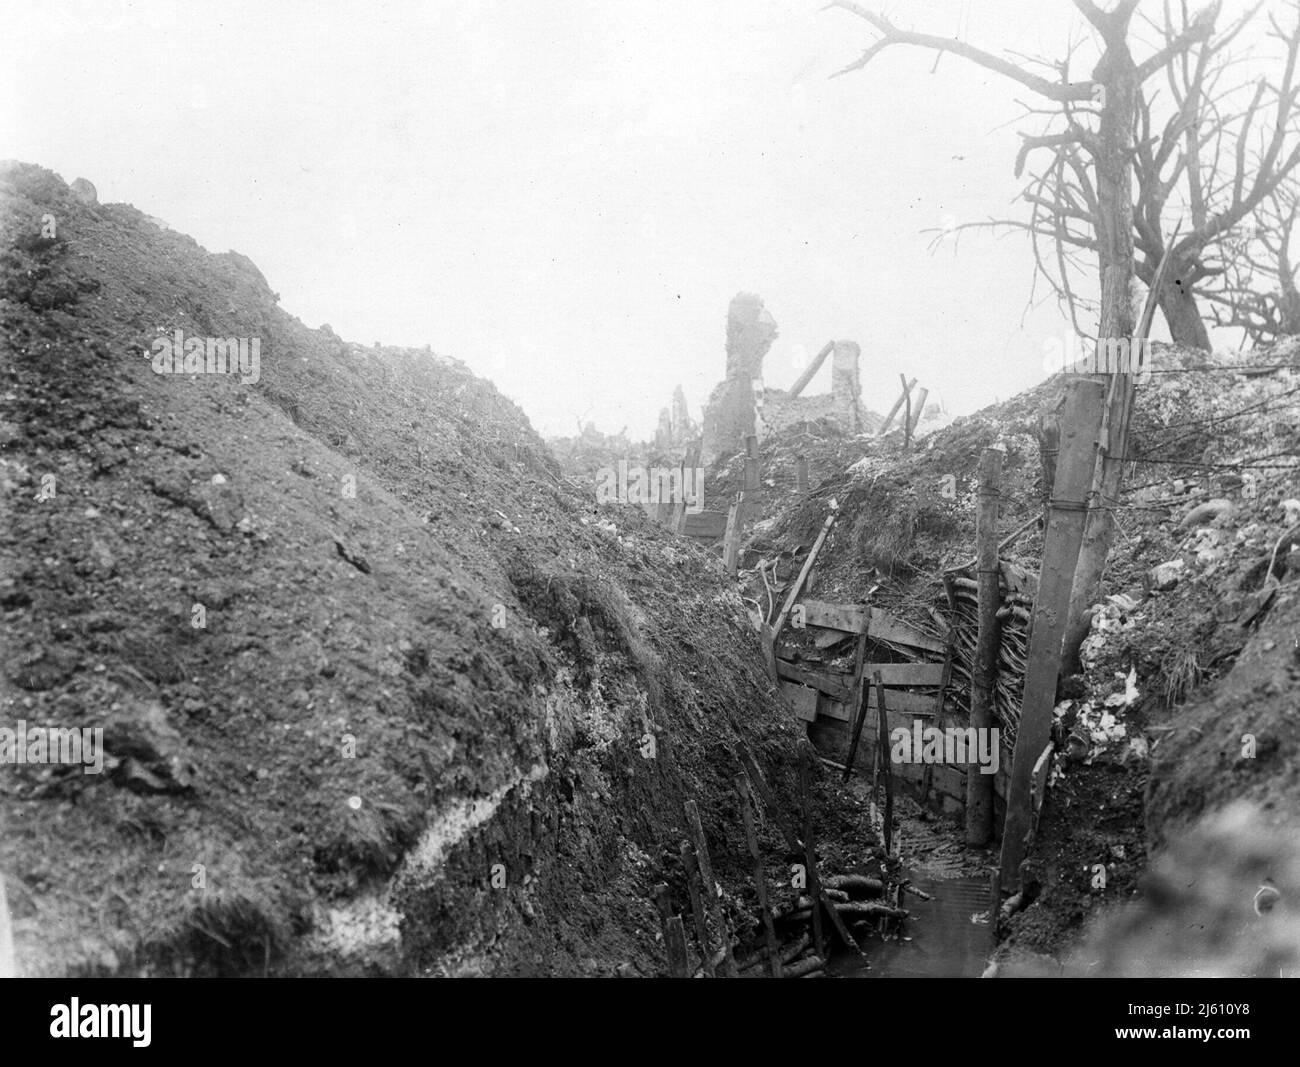 Captured German trench, Gommecourt, France, during World War I. This image shows a typical trench - flooded and extremely muddy. The sides of the trench have been reinforced with large posts, planks of wood and interwoven branches. This photograph gives a very good impression of how high the walls of a trench could be. Soldiers could stand upright in this trench without fear of being seen. Stock Photo